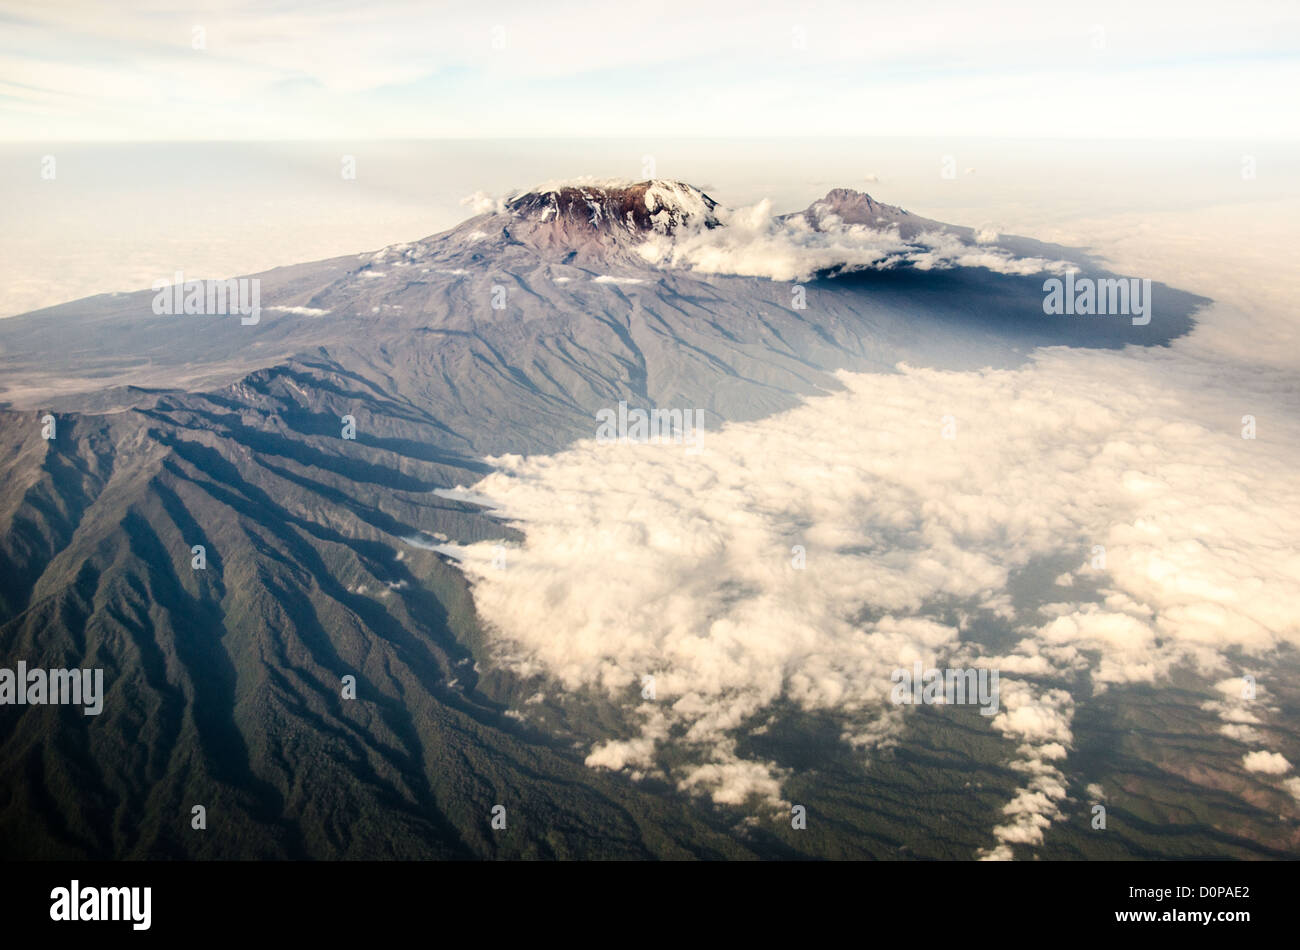 MT KILIMANJARO, Tanzania - Mount Kilimanjaro Aerial View Summit with Snow. An aerial view of Mount Kilimanjaro, the highest peak in Africa, with a snow-covered peak. Stock Photo